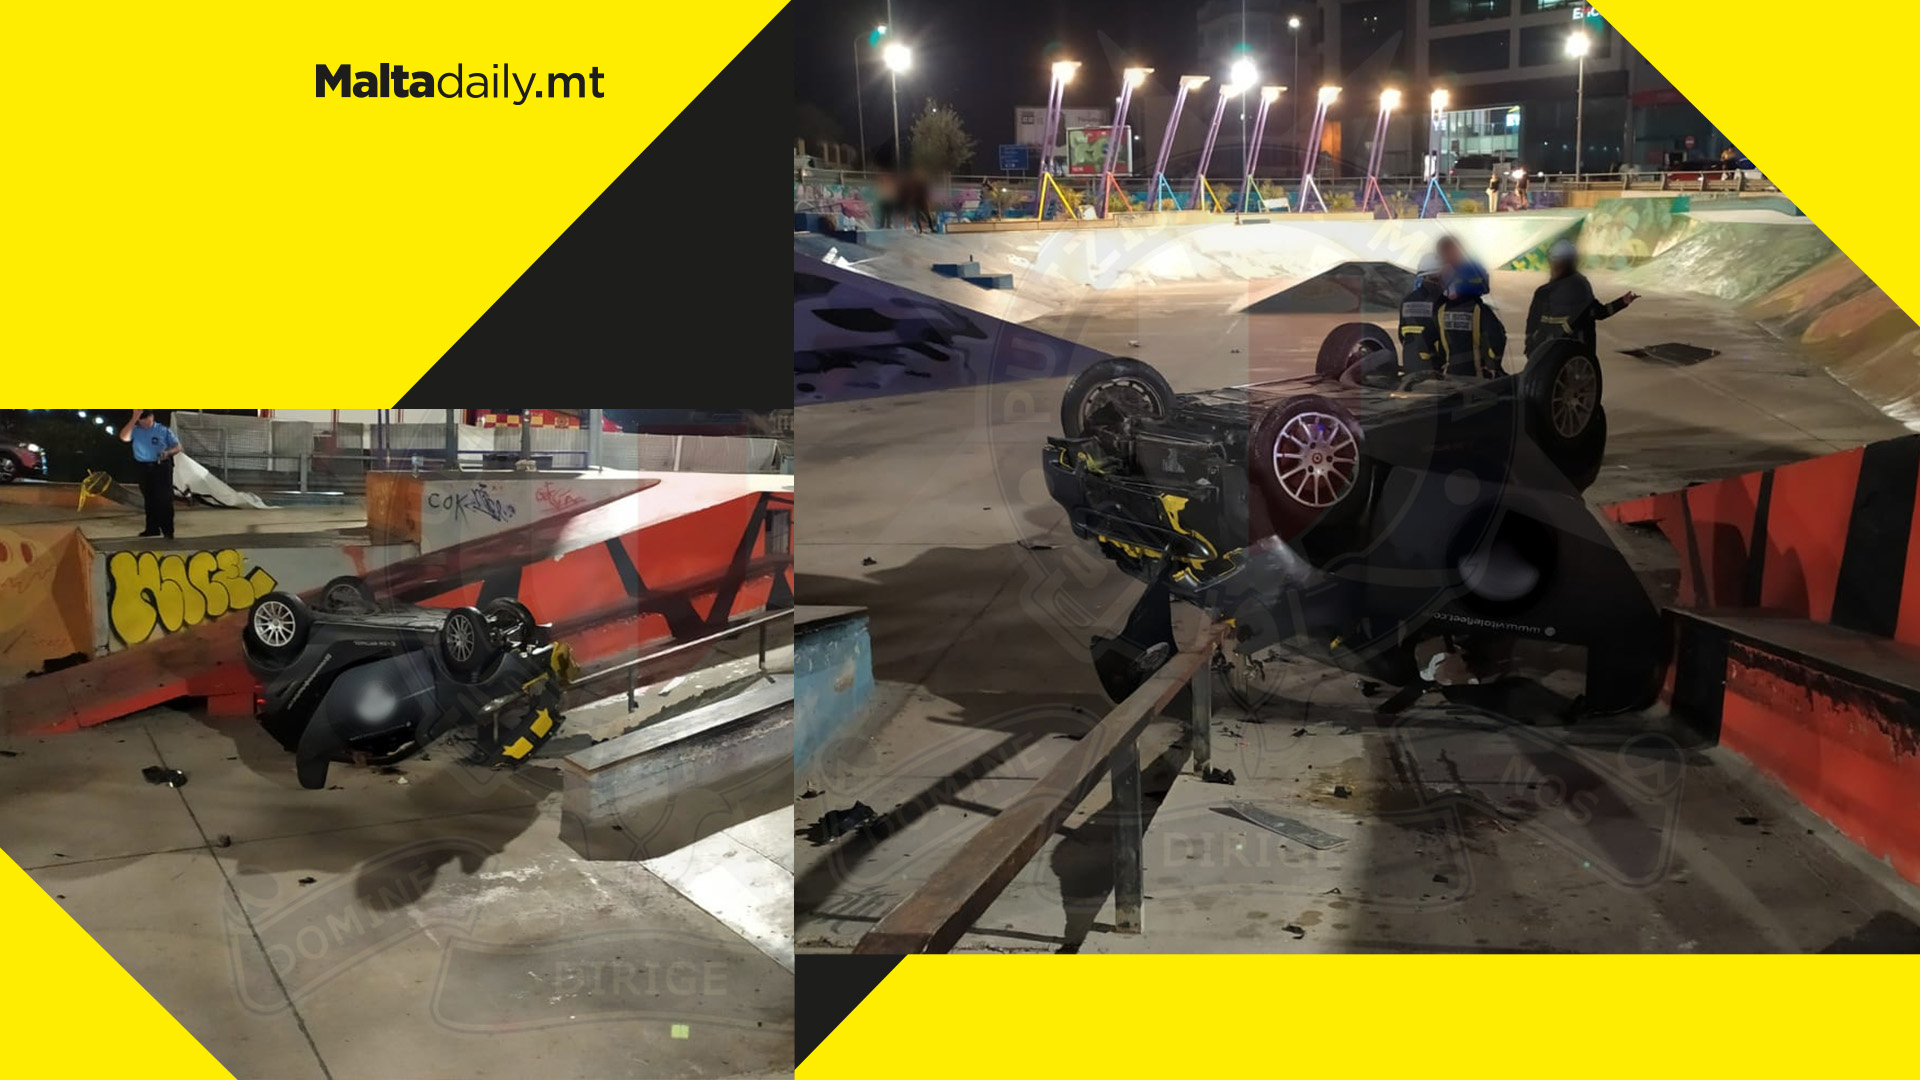 29-year-old man from Hamrun sustains grievous injuries in Msida skatepark incident